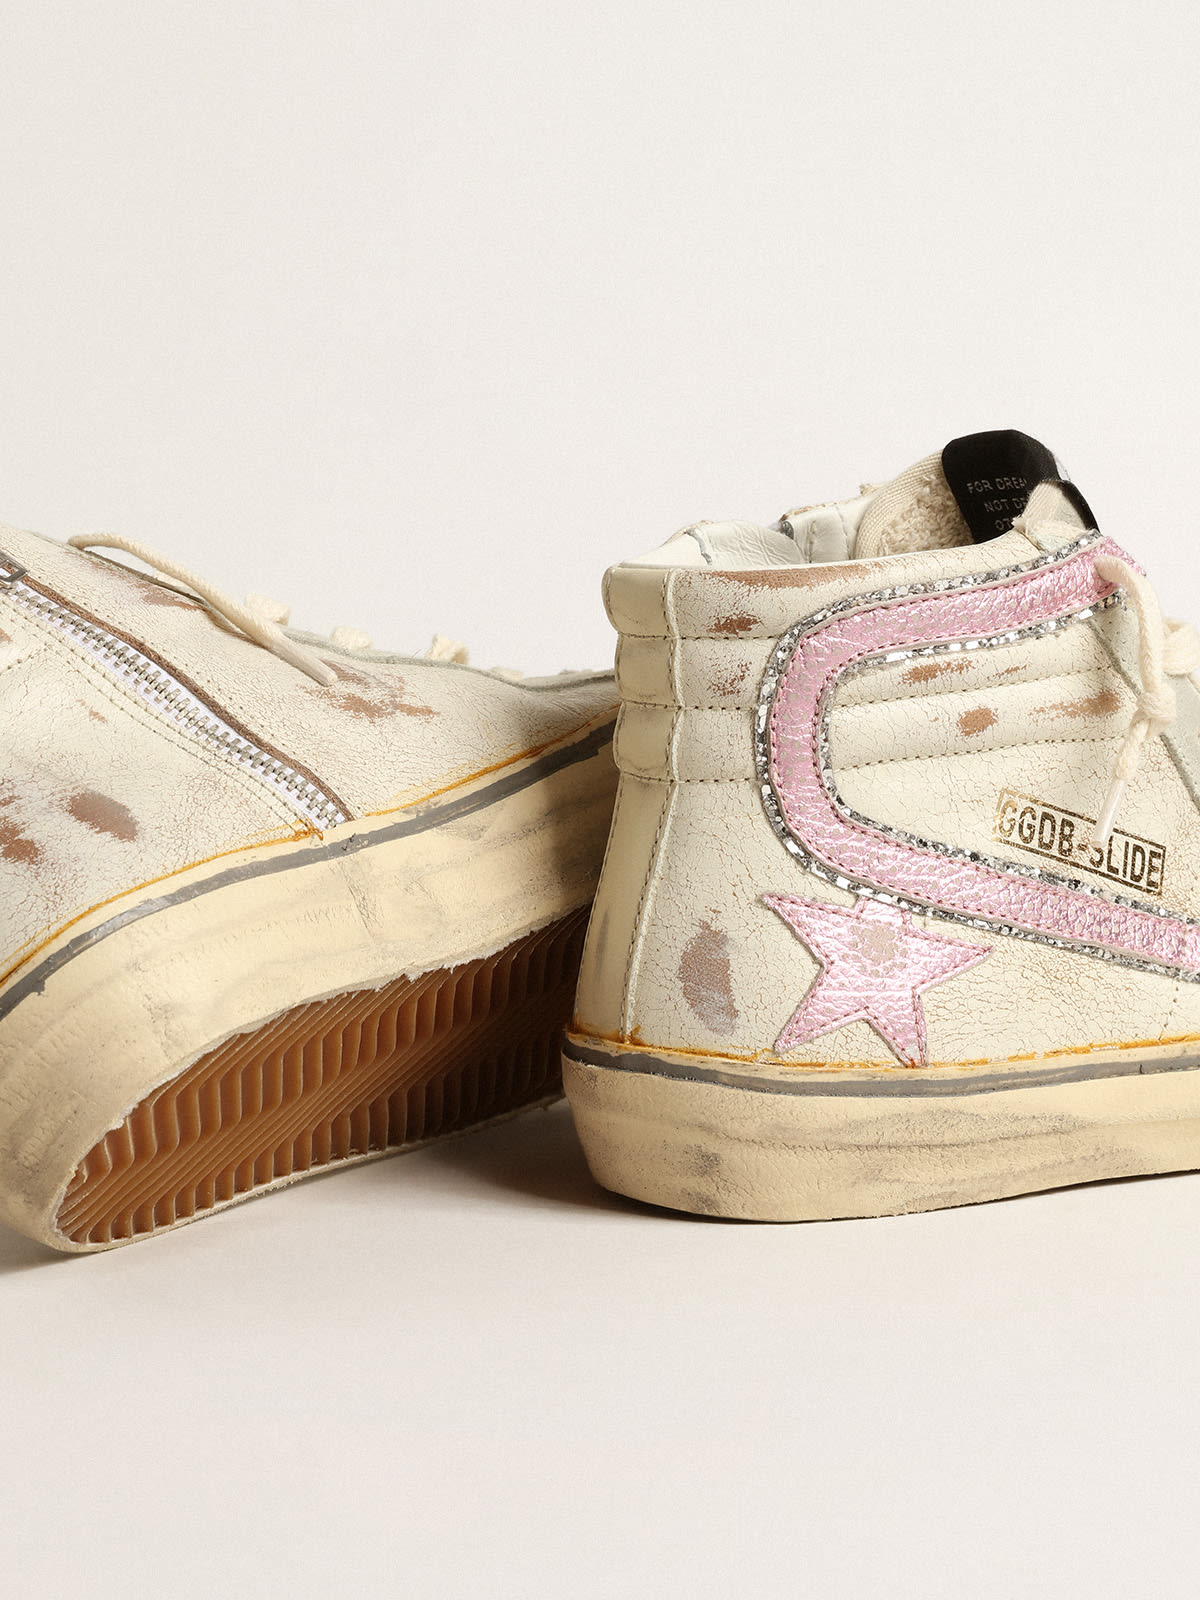 Golden Goose - Slide LTD in beige with pink metallic leather star and flash in 